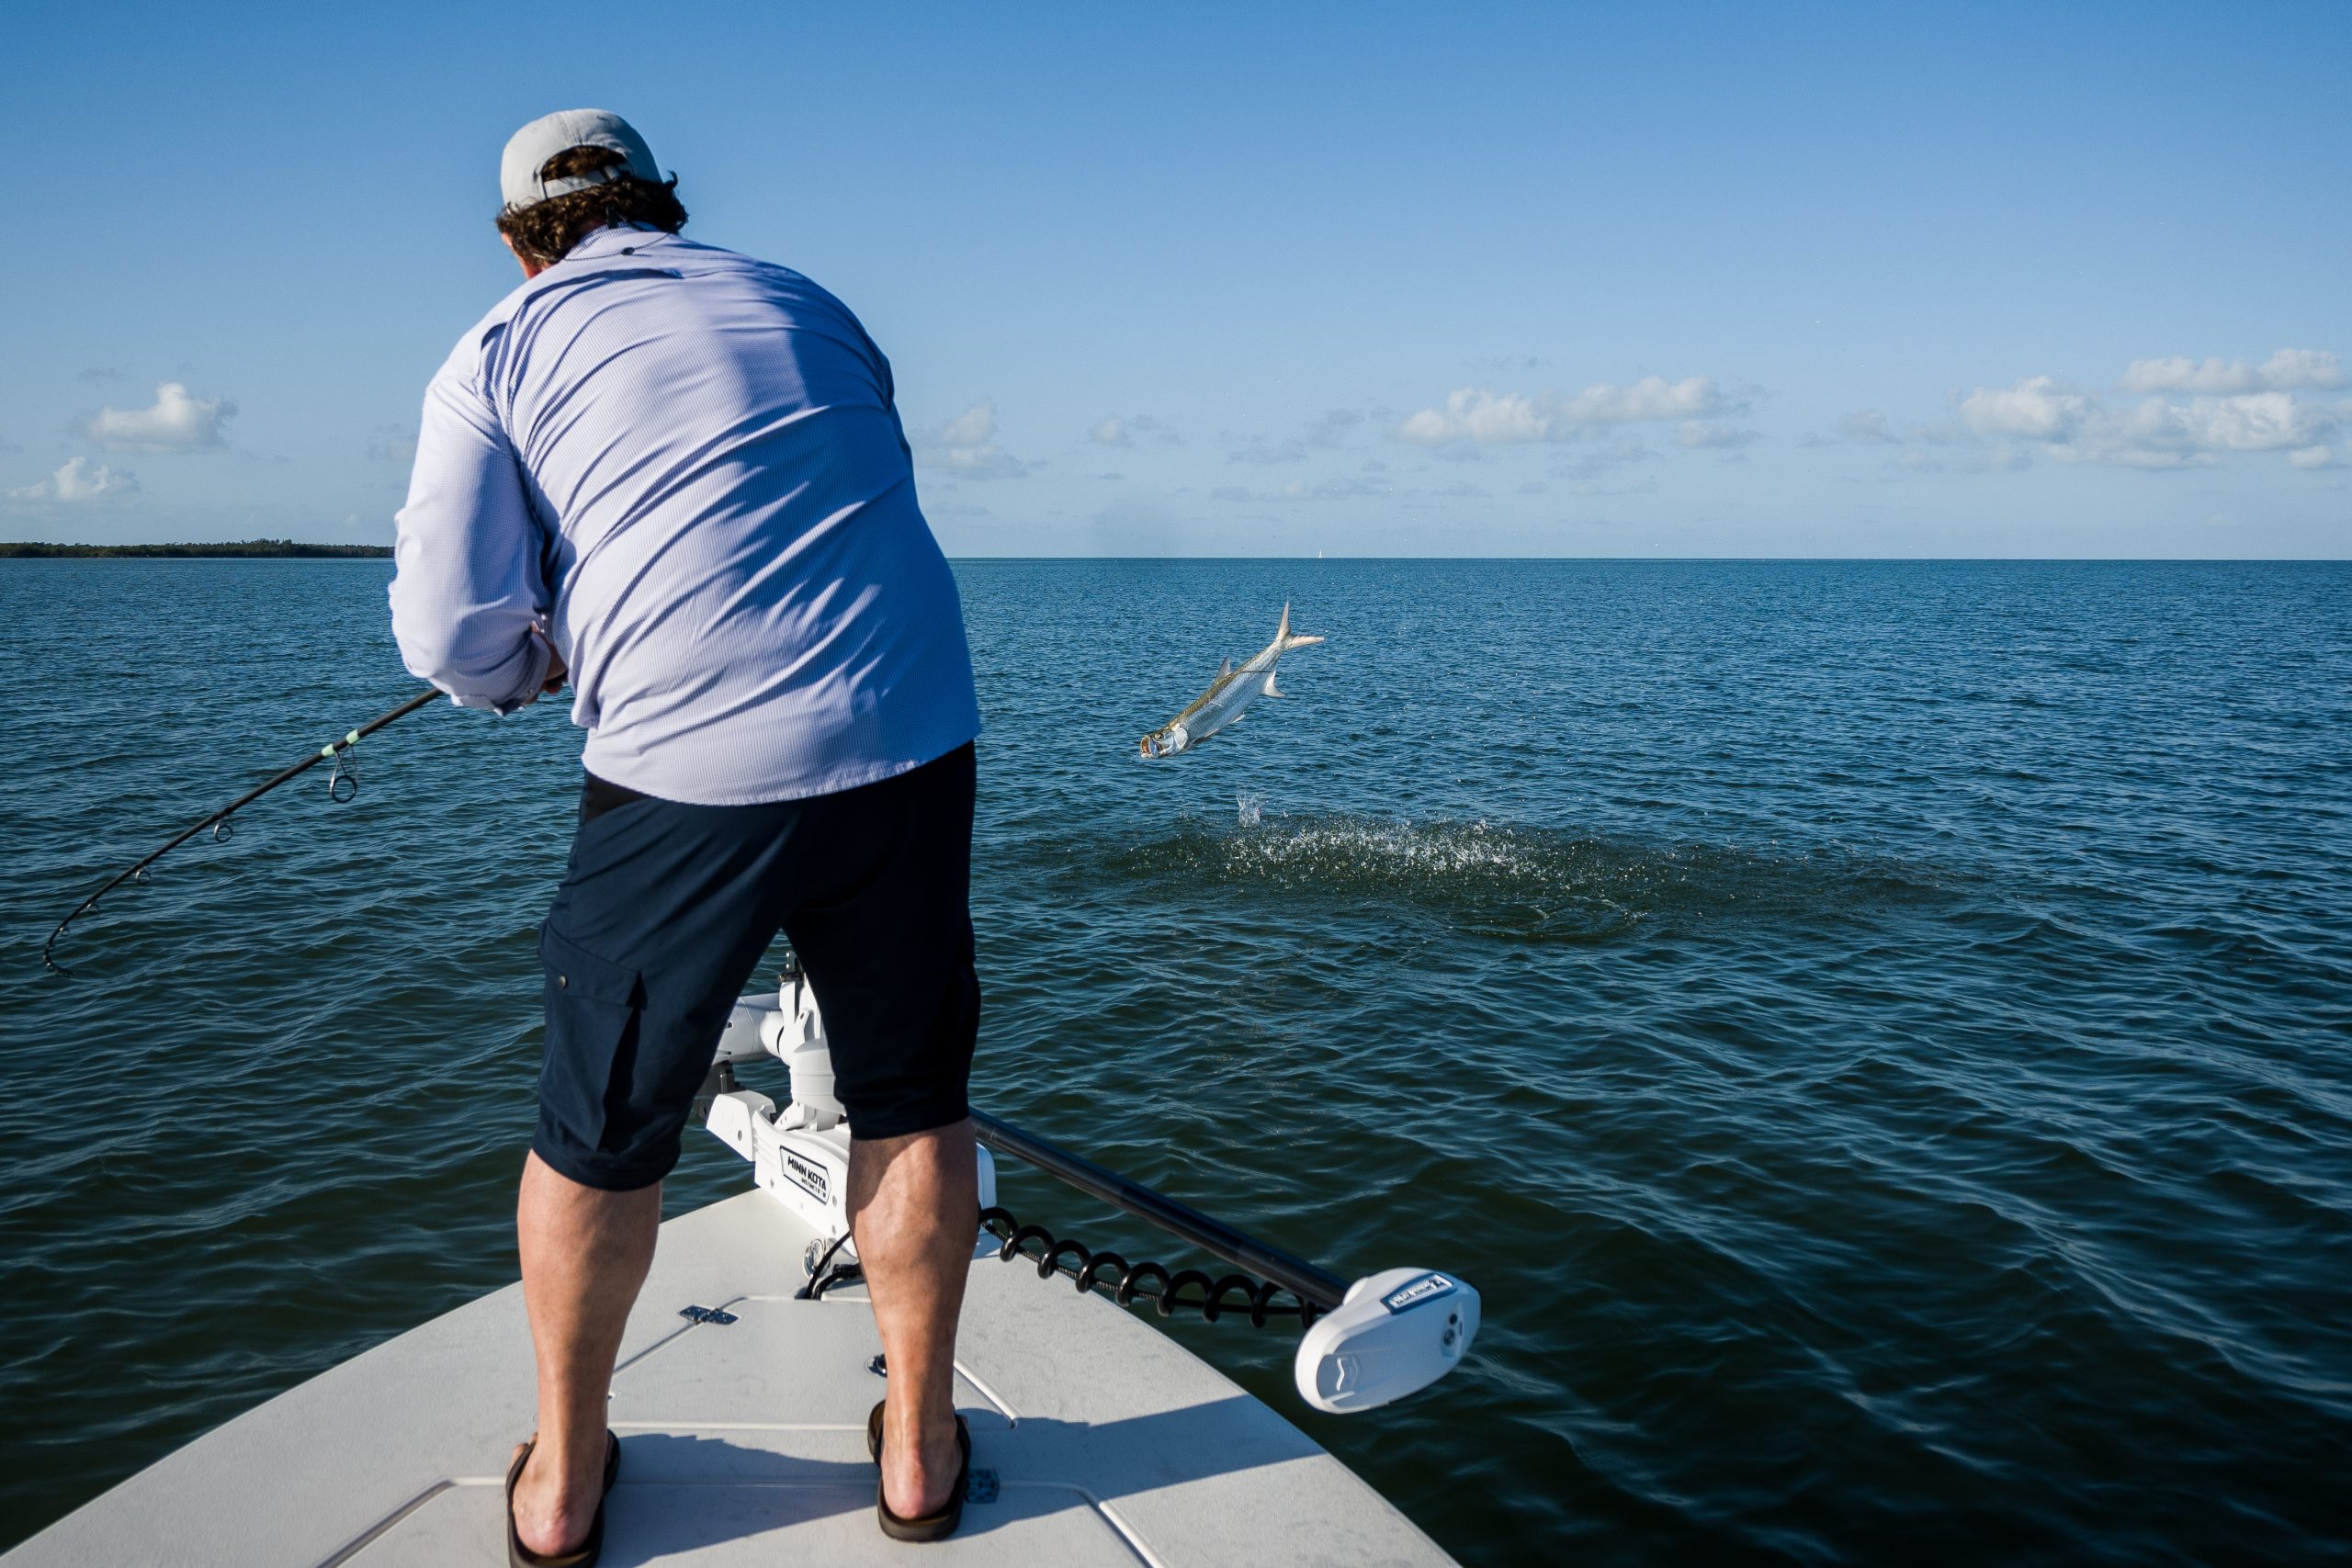 Tarpon fishing the Everglades National Park in Florida with Captain Mark Bennett